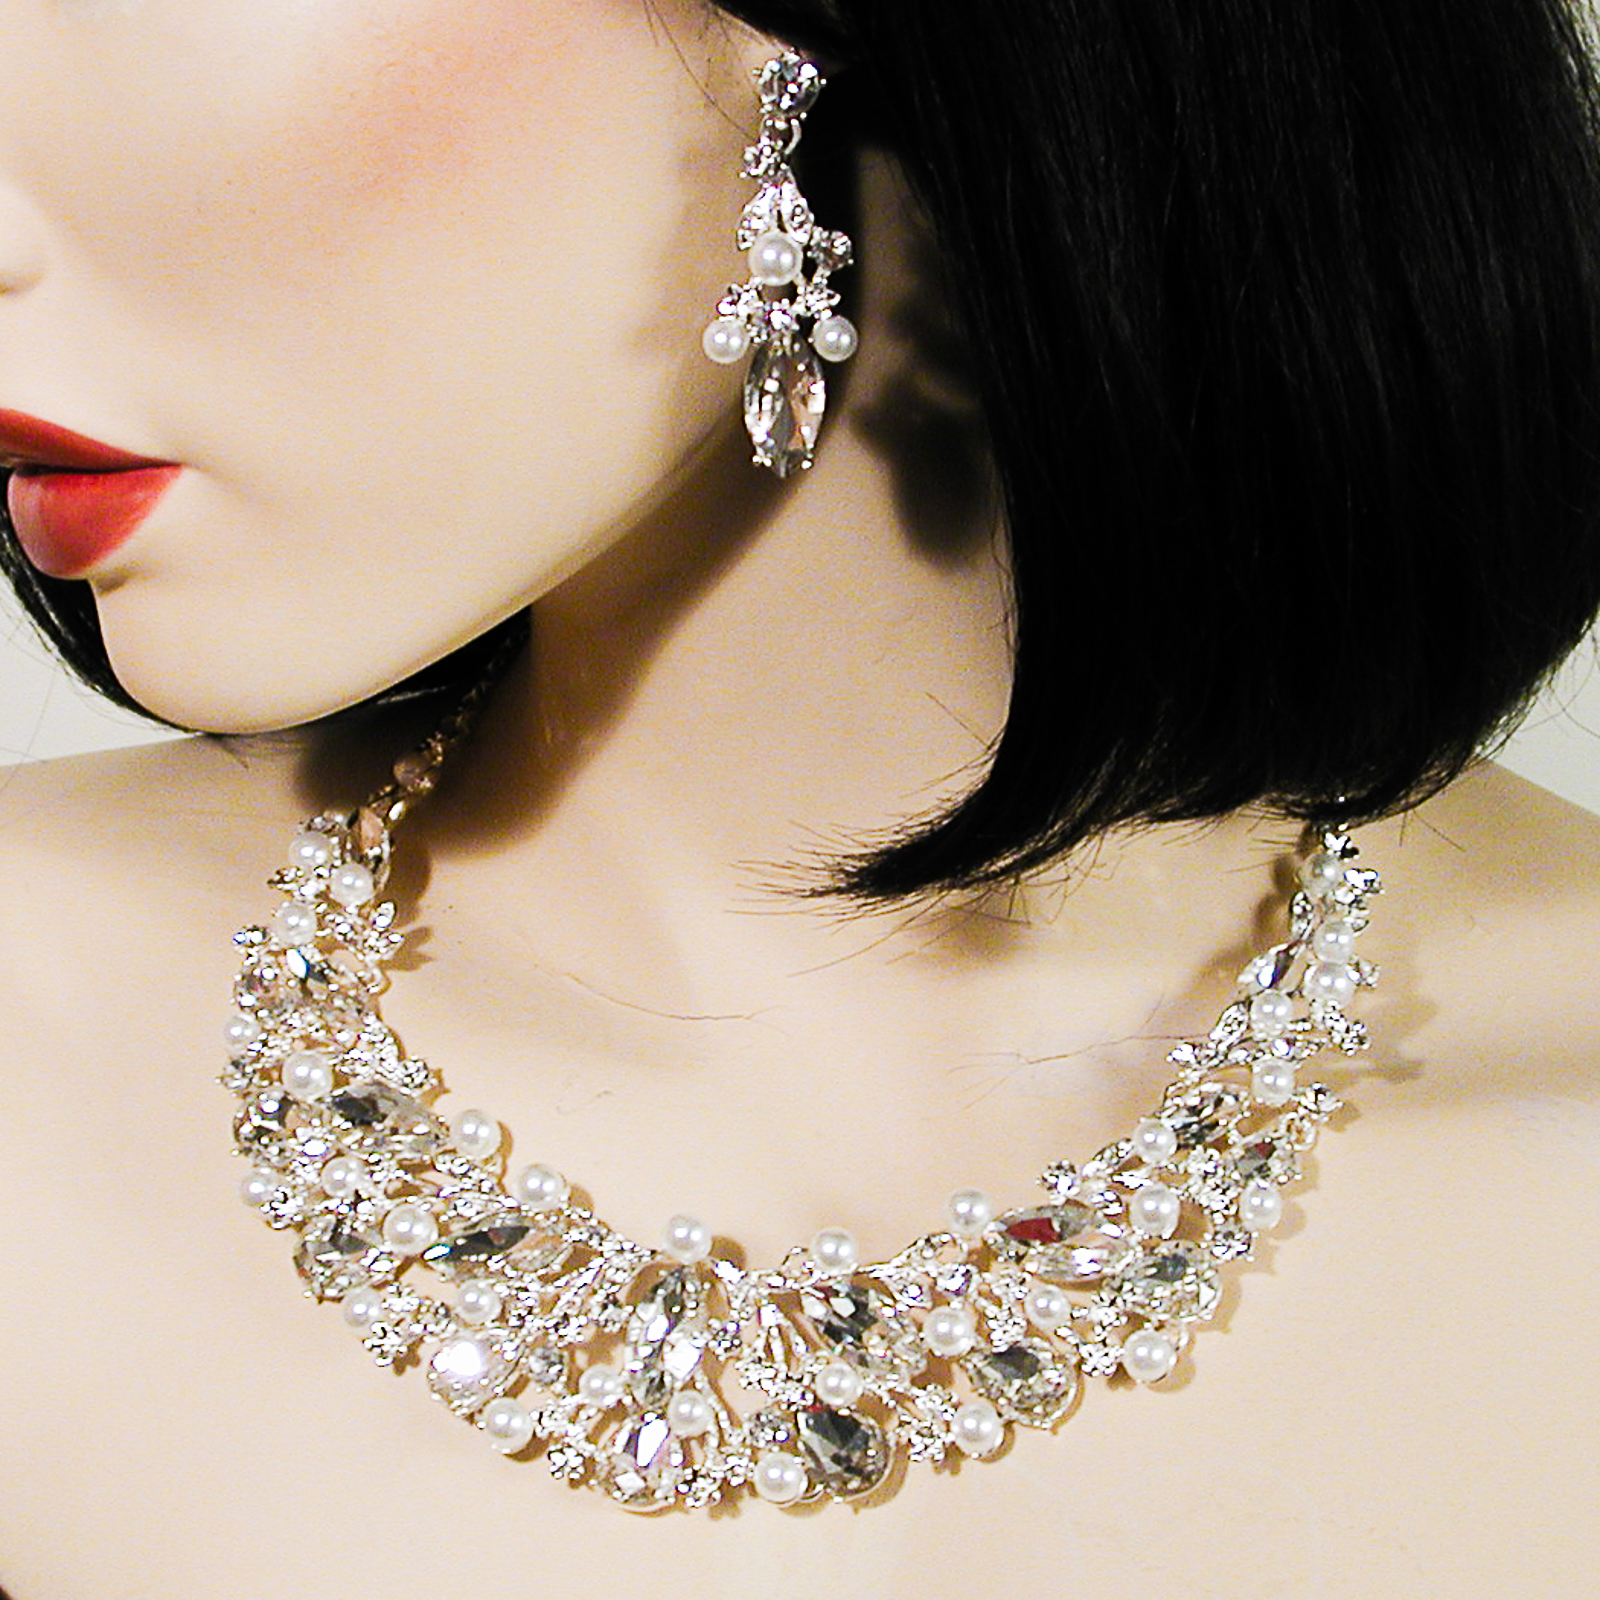 Large Statement Pearl and Rhinestone Bib Necklace Earrings Set, a fashion accessorie - Evening Elegance